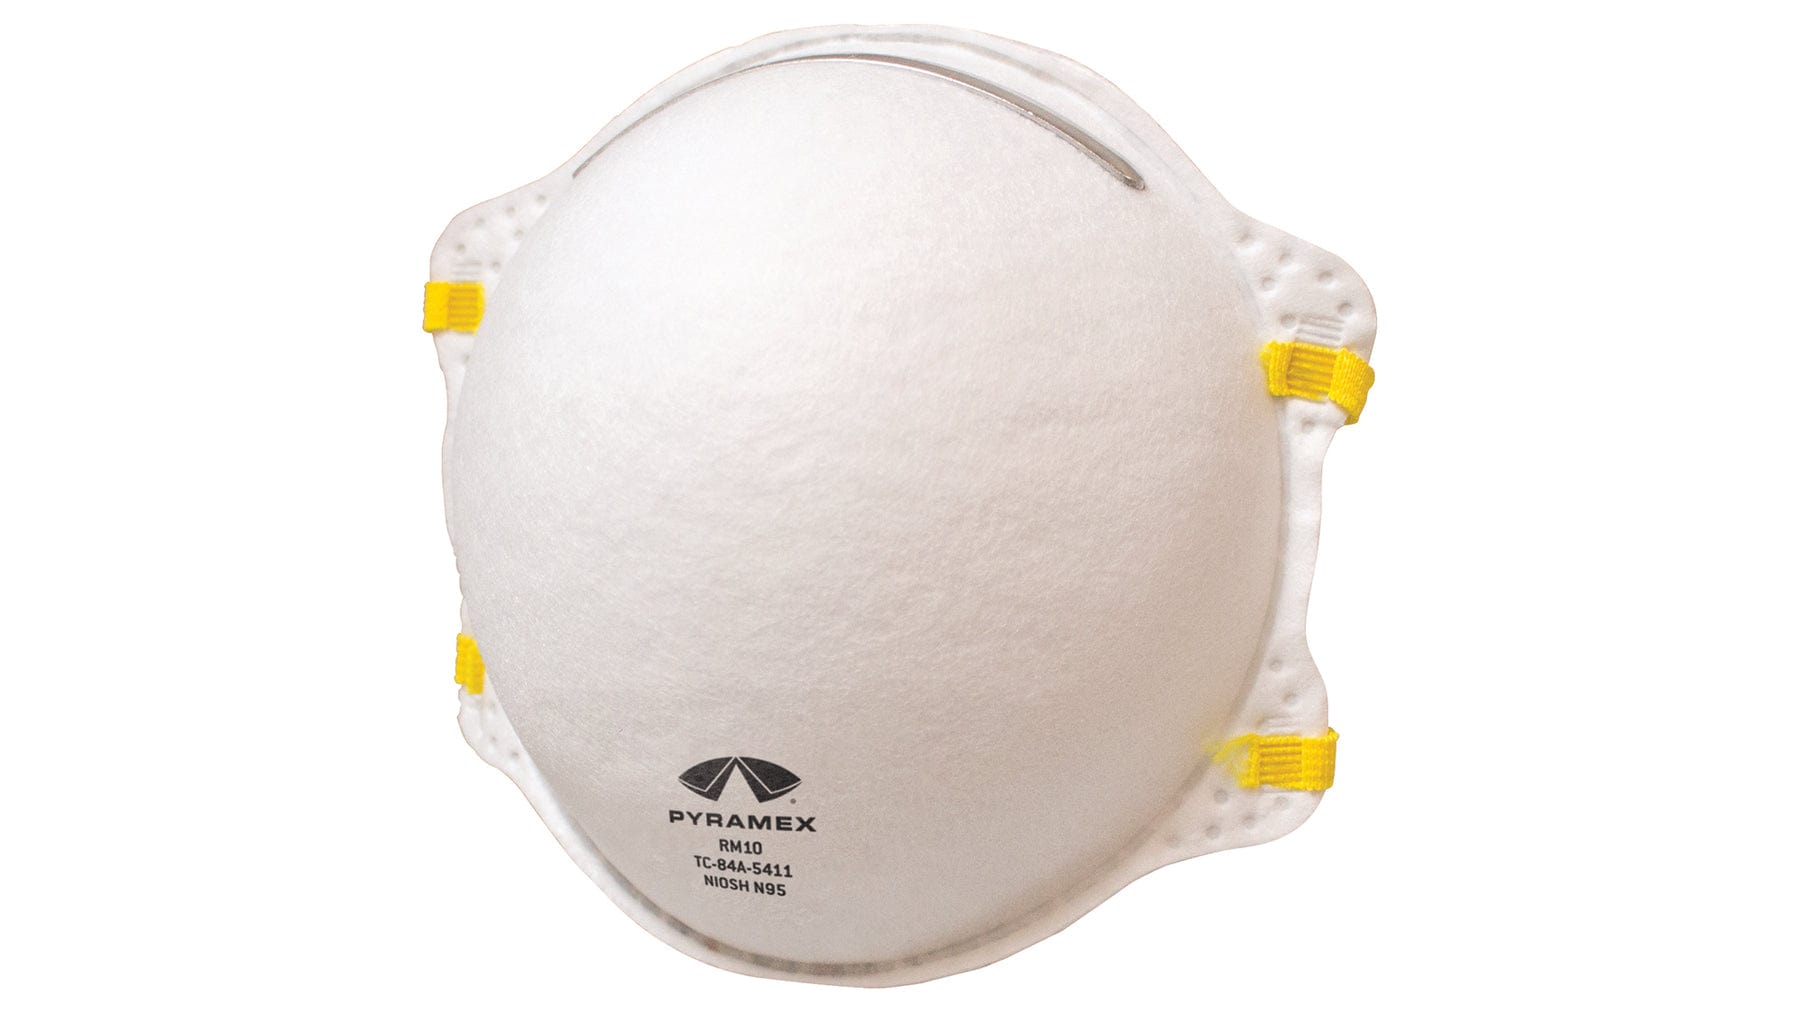 Pyramex Disposable N95 Respirator RM10 Front View